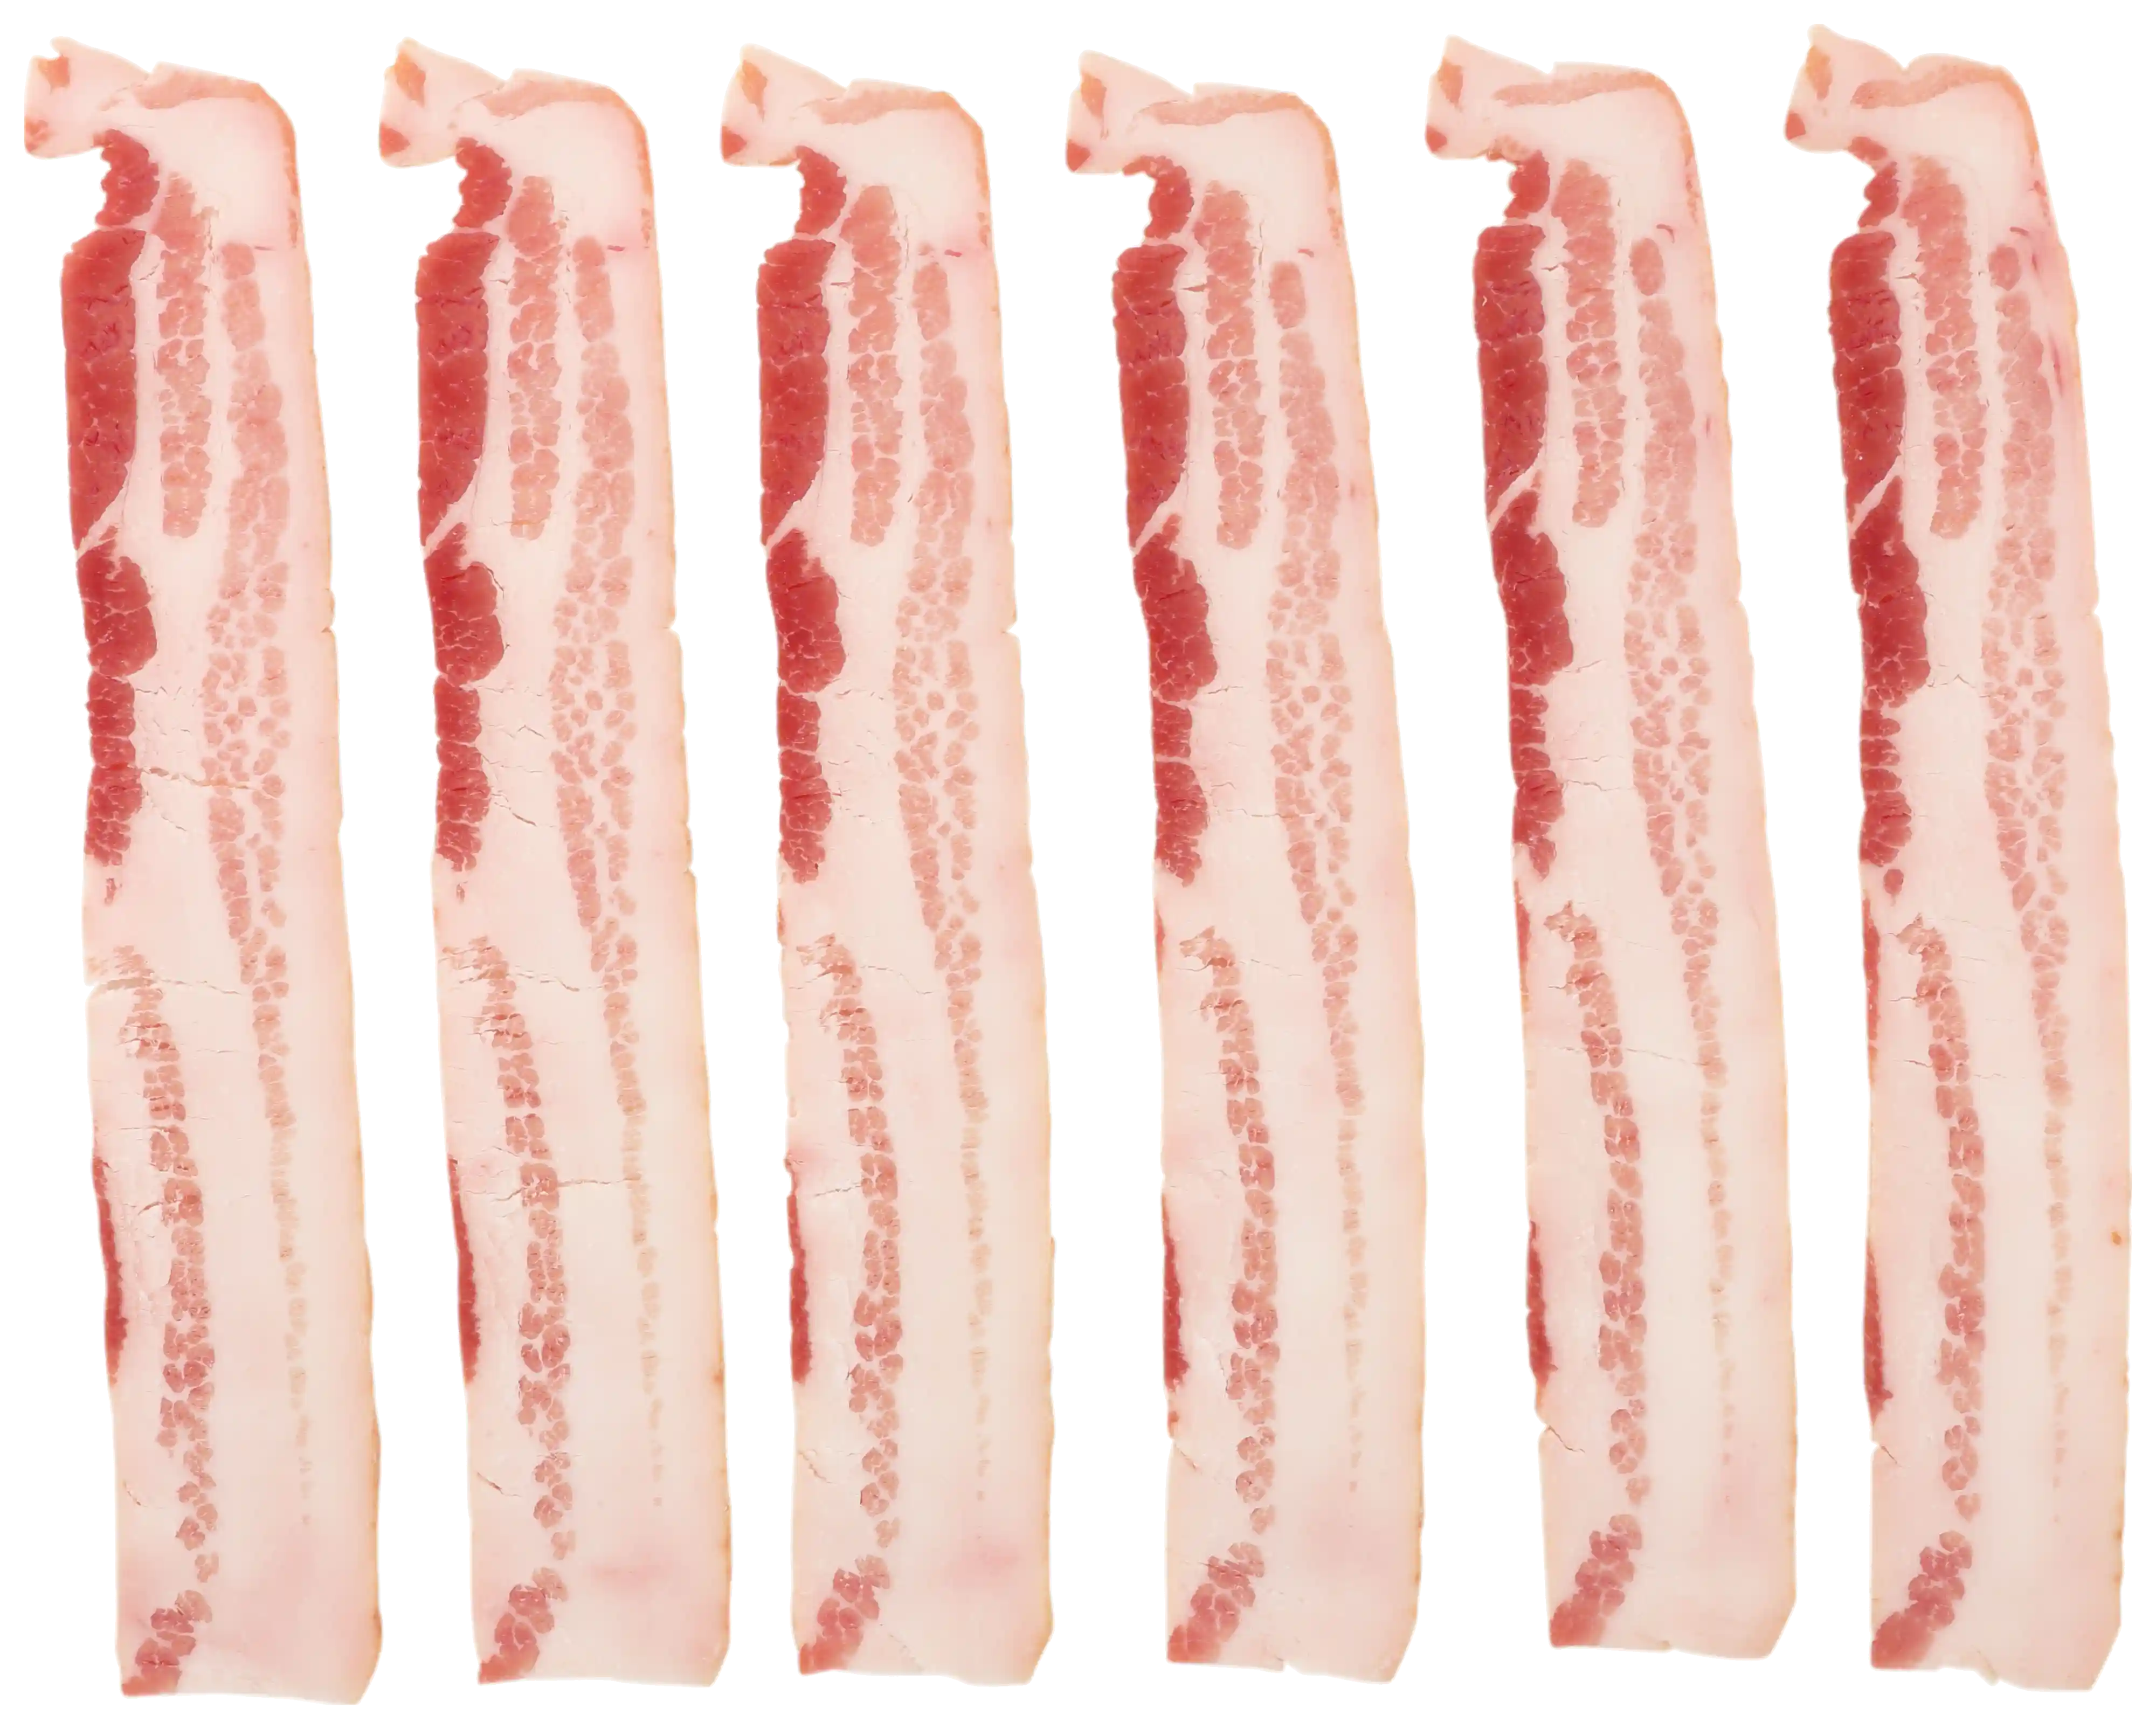 Wright® Brand Naturally Hickory Smoked Thin Sliced Bacon, Bulk, 10 Lbs, 18-22 Slices Per Pound, Frozen_image_21